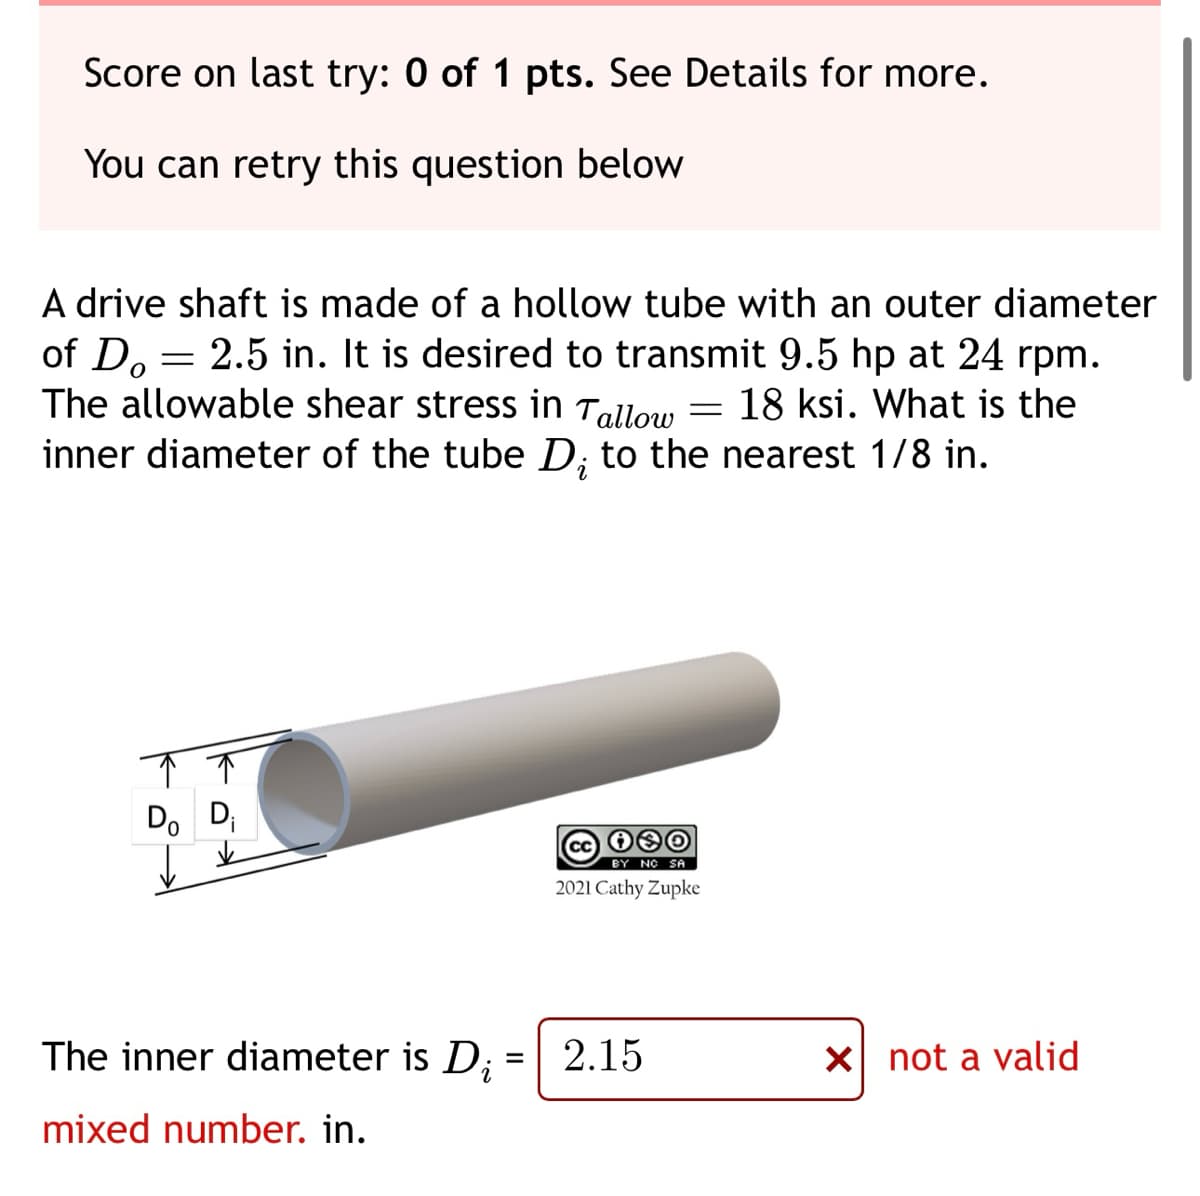 Score on last try: 0 of 1 pts. See Details for more.
You can retry this question below
of Do
A drive shaft is made of a hollow tube with an outer diameter
2.5 in. It is desired to transmit 9.5 hp at 24 rpm.
The allowable shear stress in Tallow = 18 ksi. What is the
inner diameter of the tube D; to the nearest 1/8 in.
=
Do Di
The inner diameter is D;
mixed number. in.
=
cc 130
BY NO SA
2021 Cathy Zupke
2.15
X not a valid